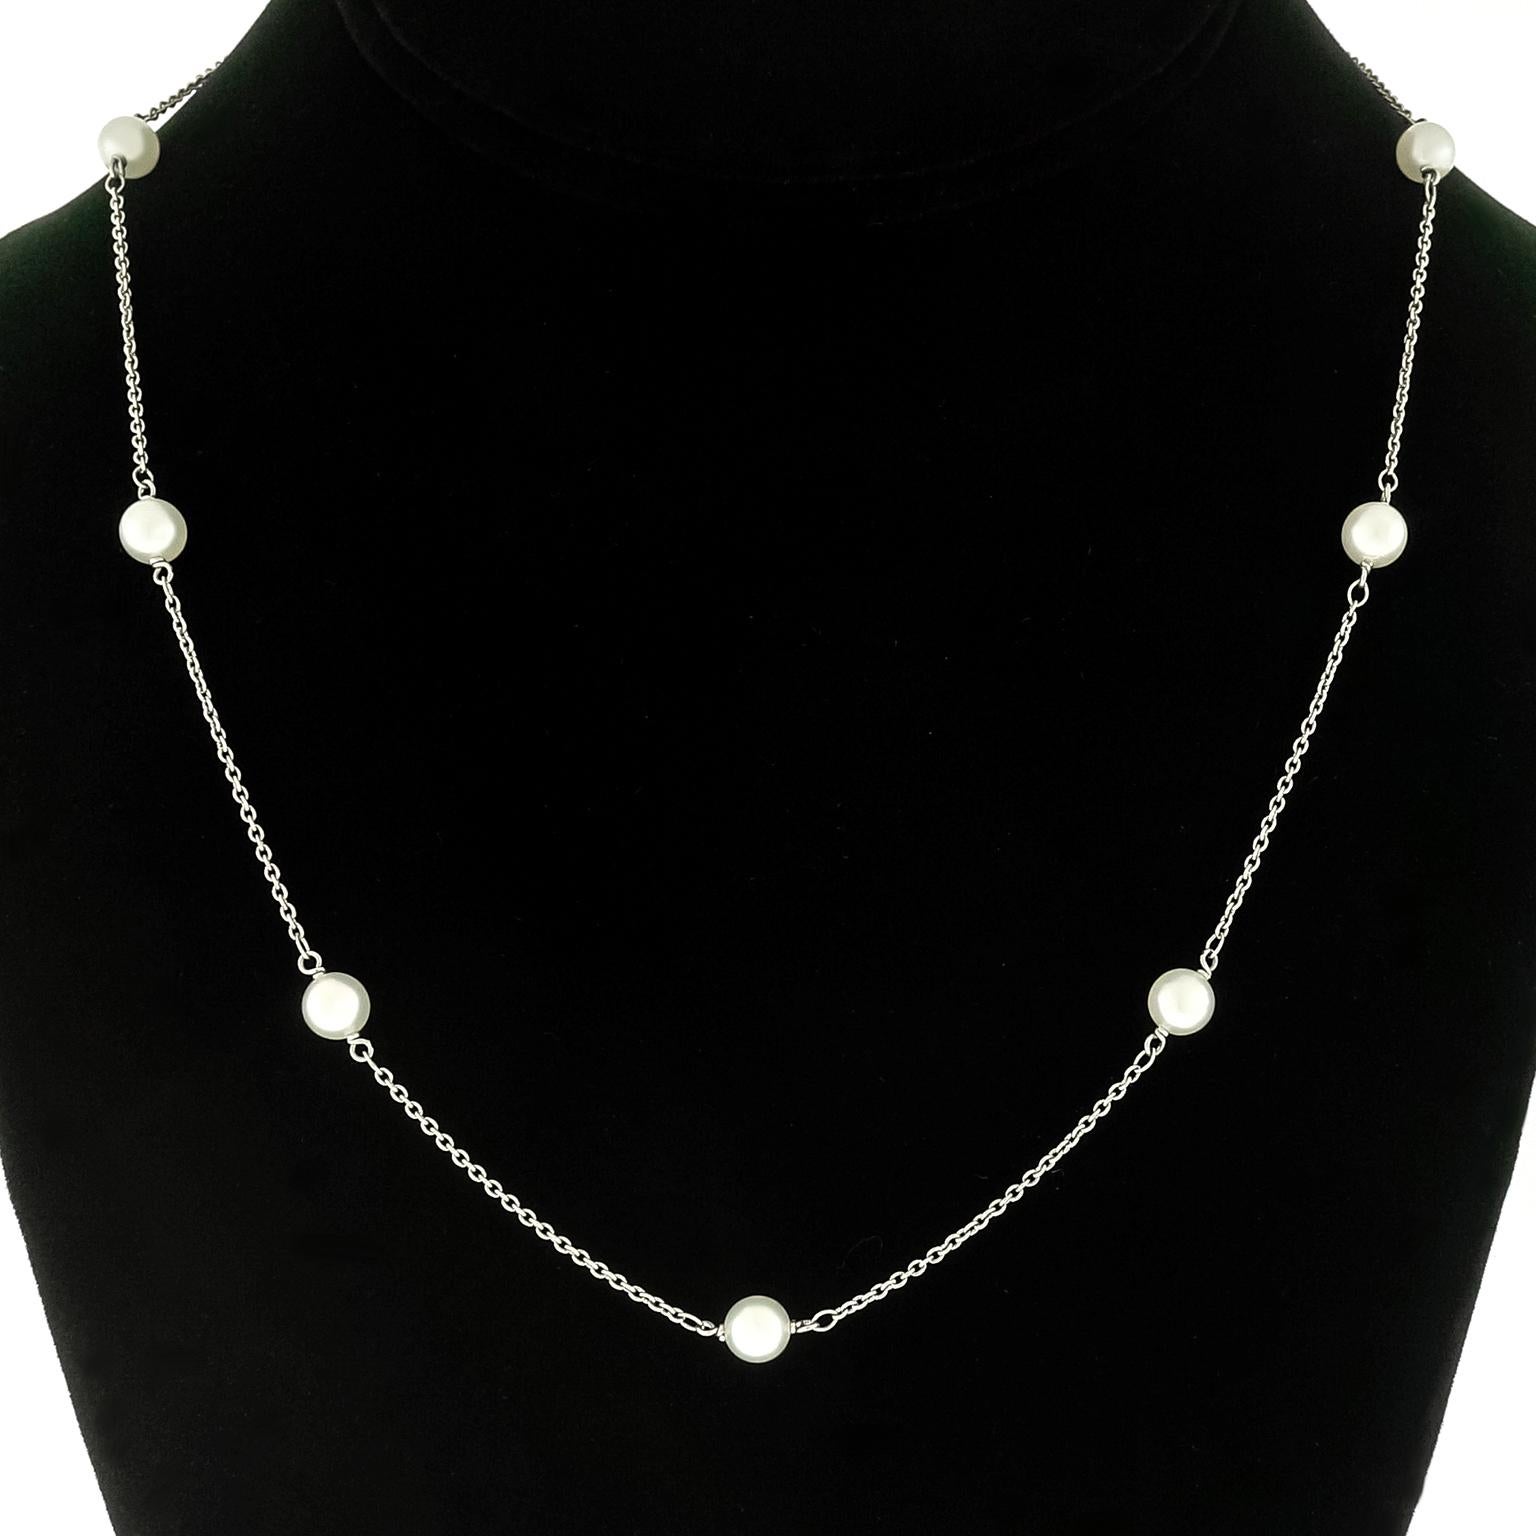 Women's Elsa Peretti for Tiffany & Co. “Pearls by the Yard”  Platinum Necklace